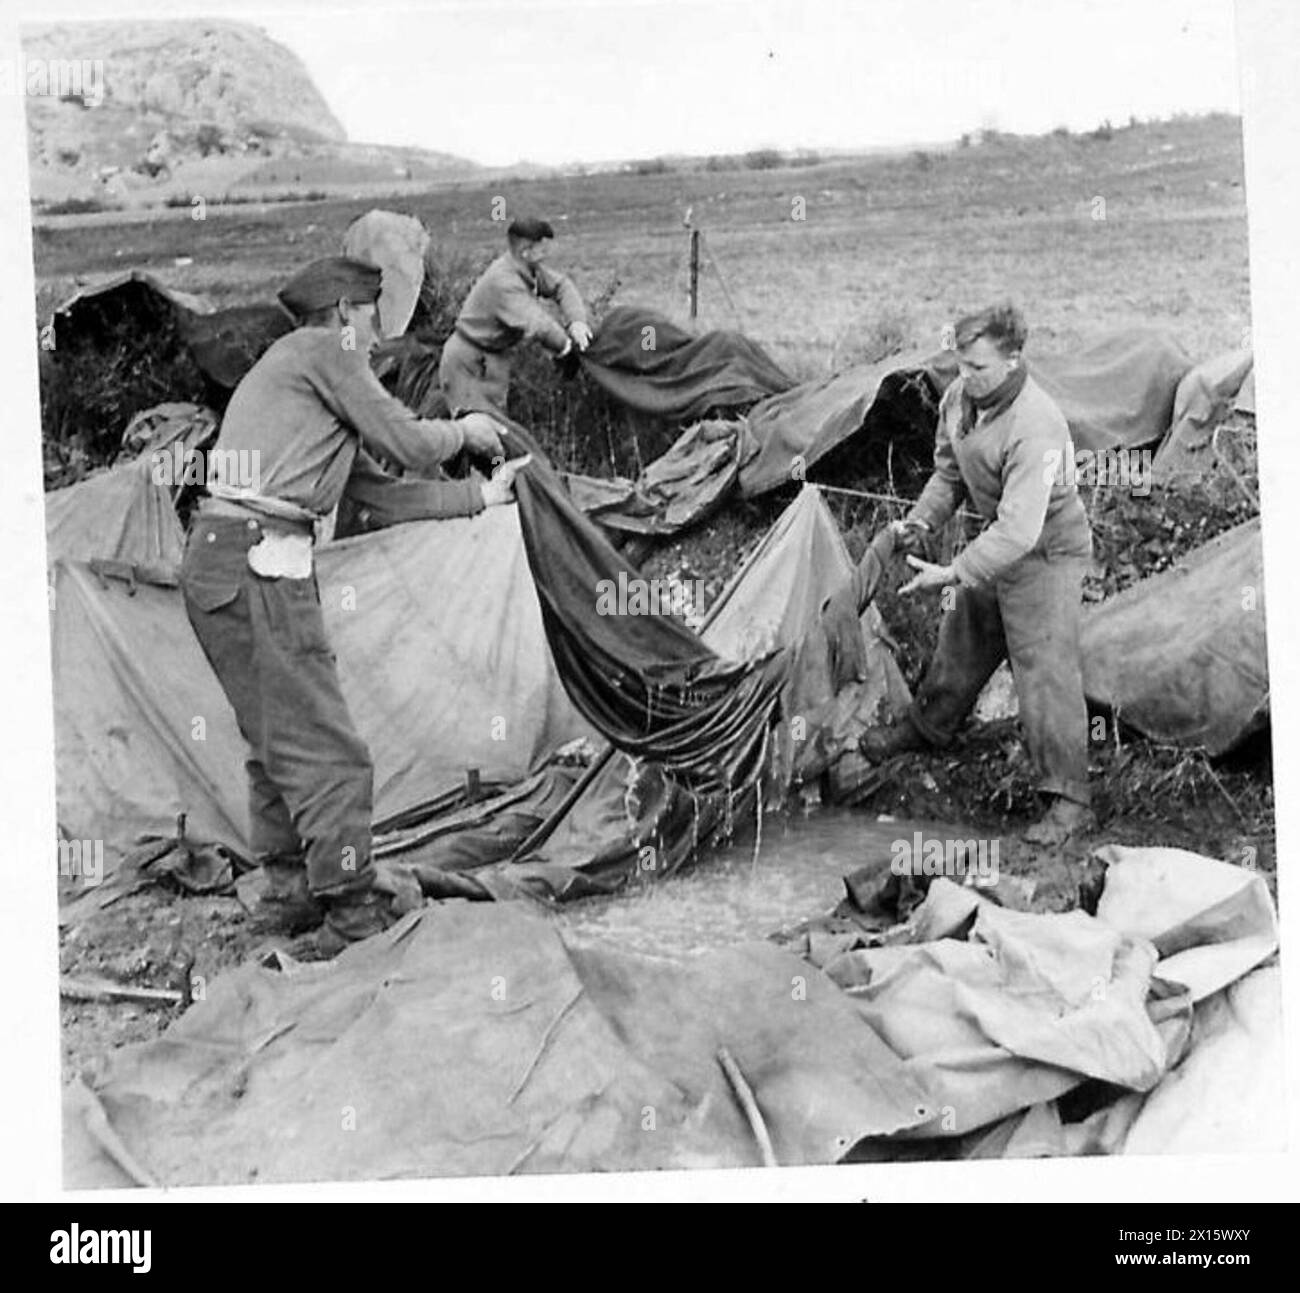 ITALY : FIFTH ARMY'AFTER THE STORM' - Sgt. J. Hamilton of Biggar, Lanarkshire, Scotland, and Gnr. H. Tennant of Lanark, Scotland, retrieve a blanket from a waterlogged tent British Army Stock Photo